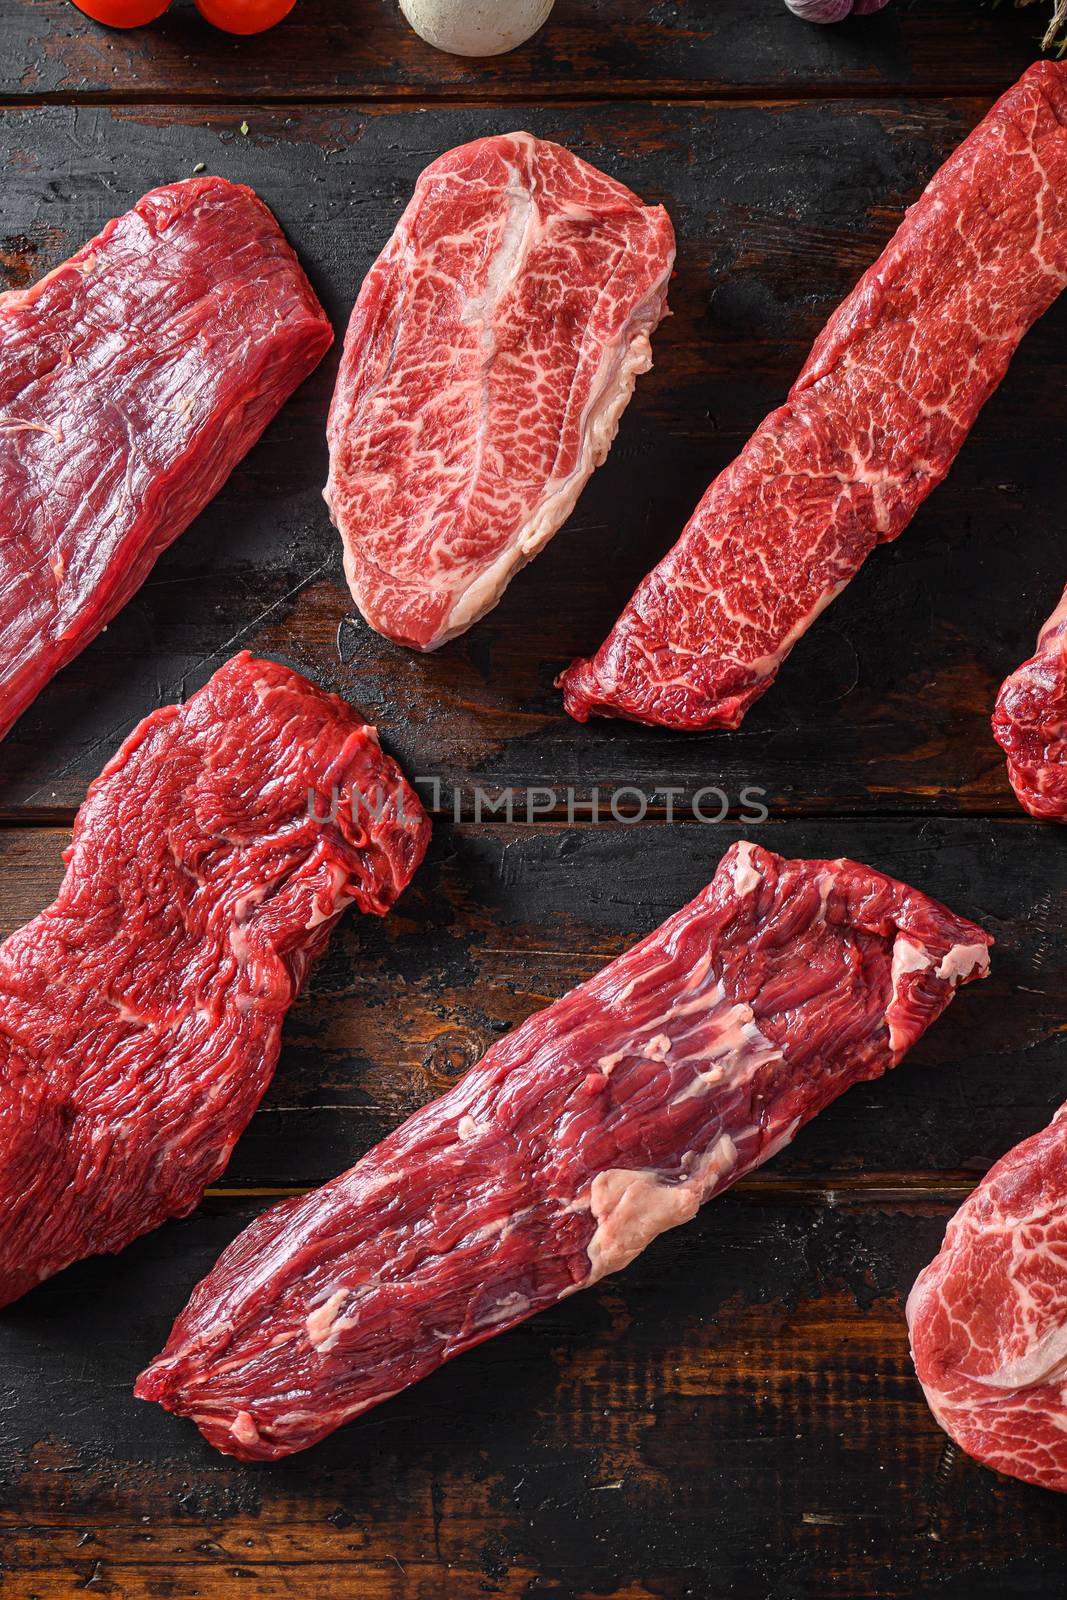 Alternative beef cut machete skirt steak close up in front of other cuts in butchery on old wood table top view vertical by Ilianesolenyi